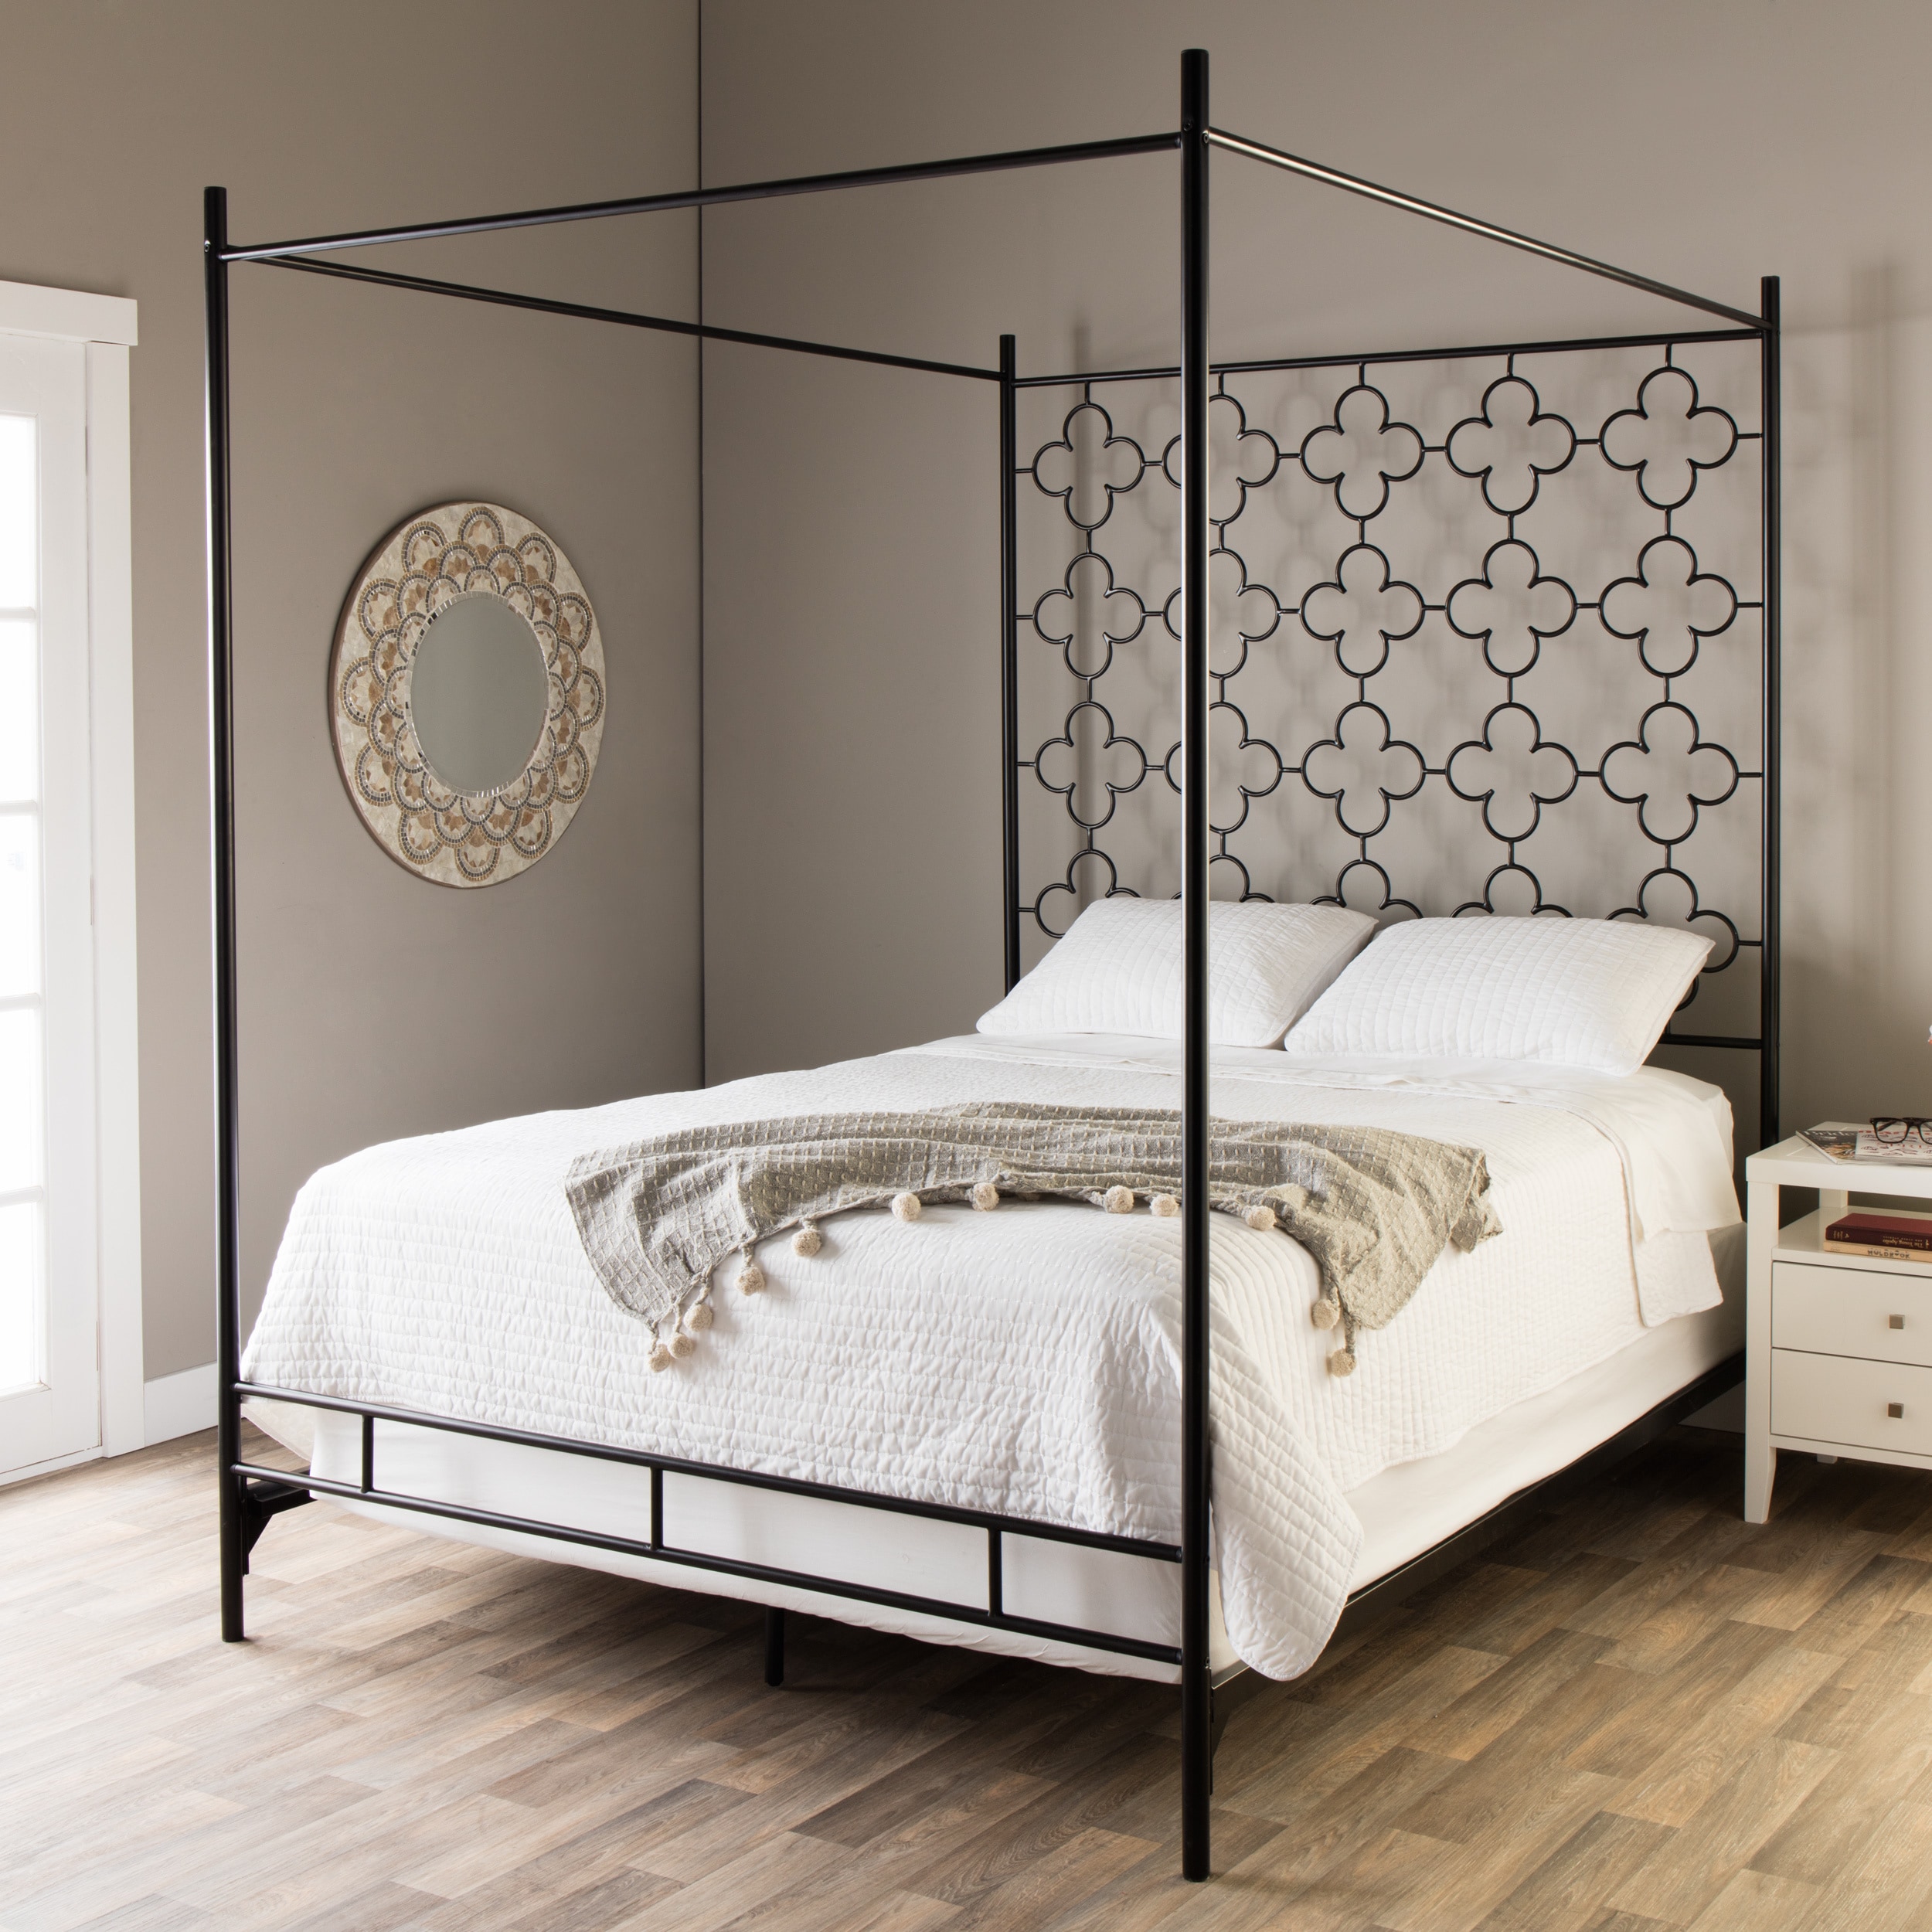 Shop Quatrefoil Queen Canopy Bed - Free Shipping On Orders ...